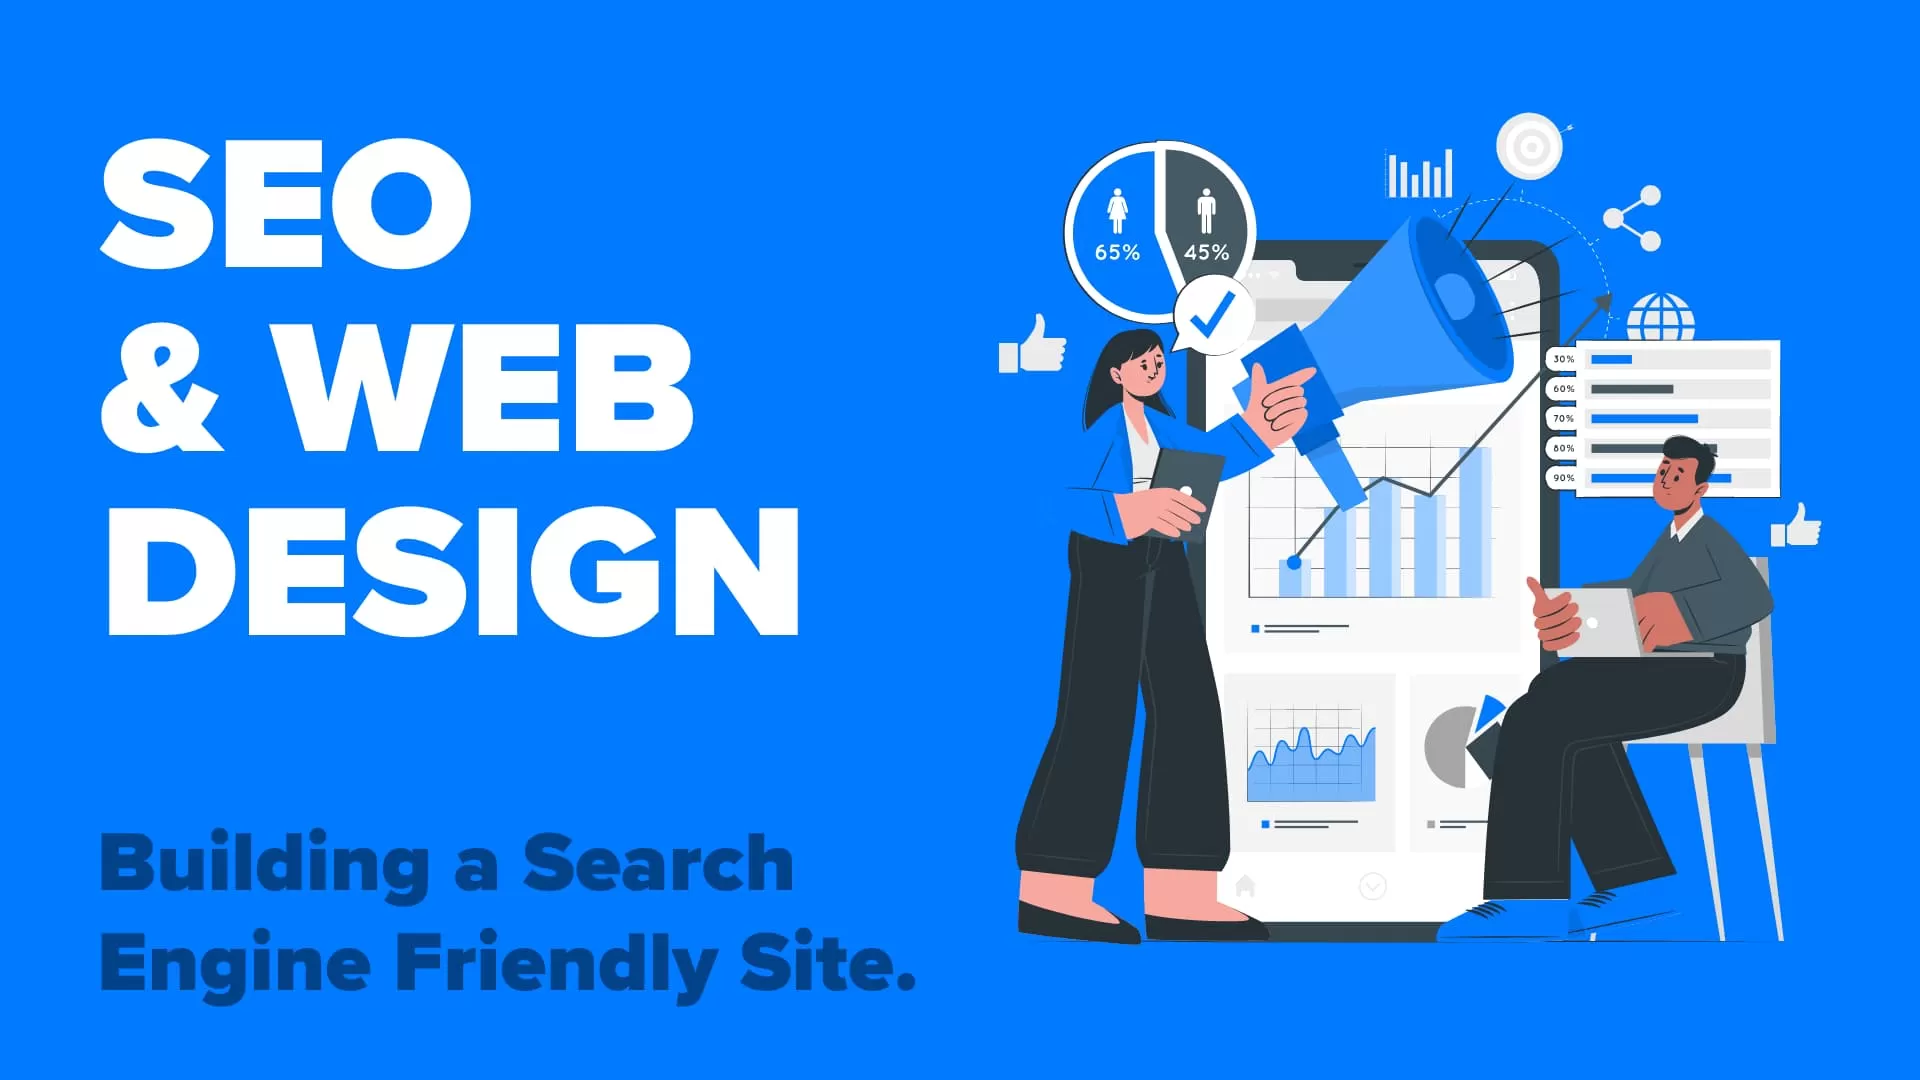 What are the ways to make money from website design and SEO?